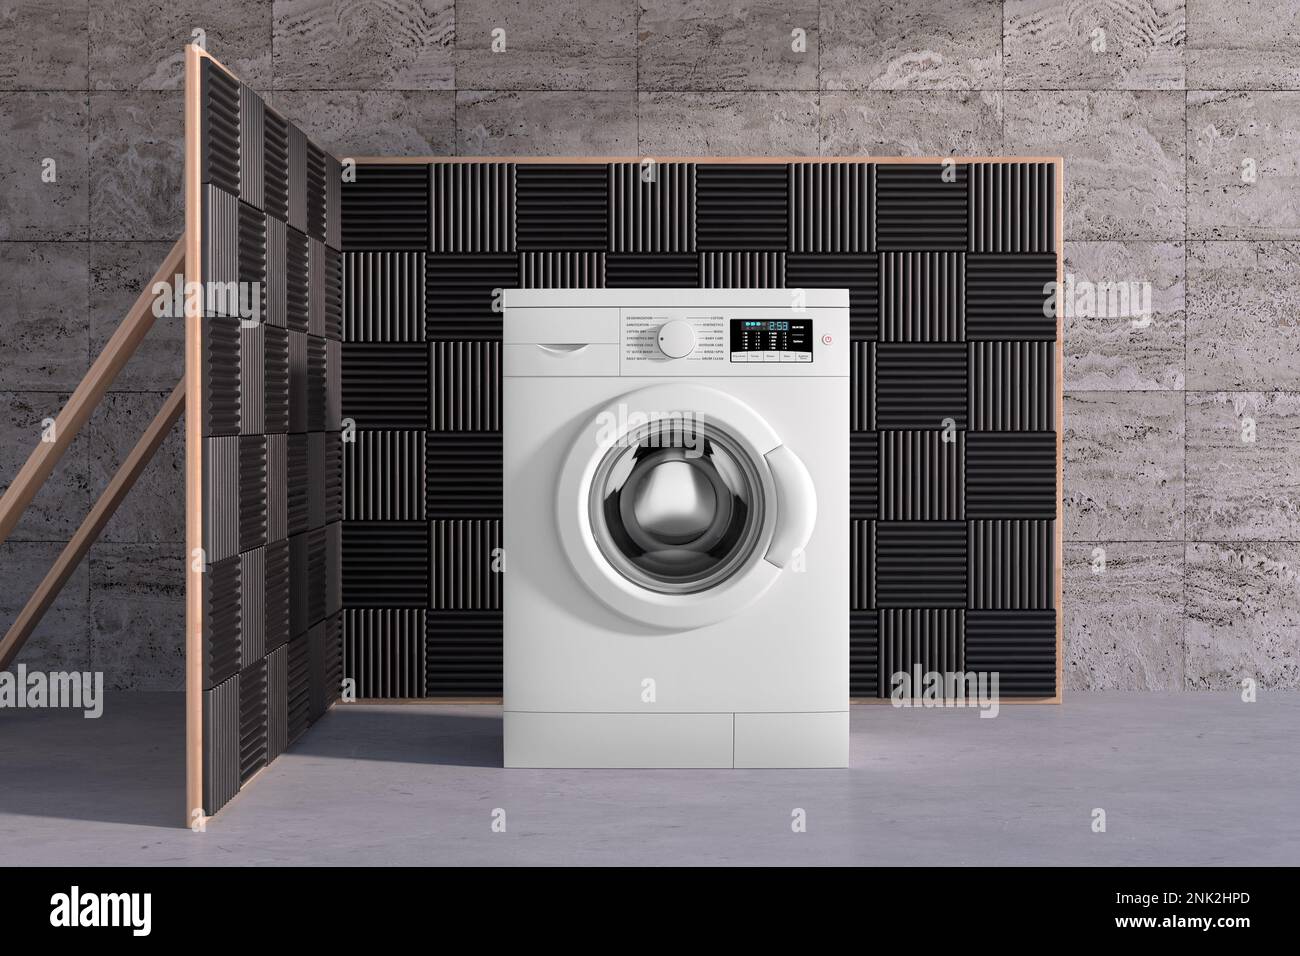 Silent Household Appliances Concept. Modern White Washing Mashine in Room with Dampening Acoustic Foam Panel Walls extreme closeup. 3d Rendering Stock Photo